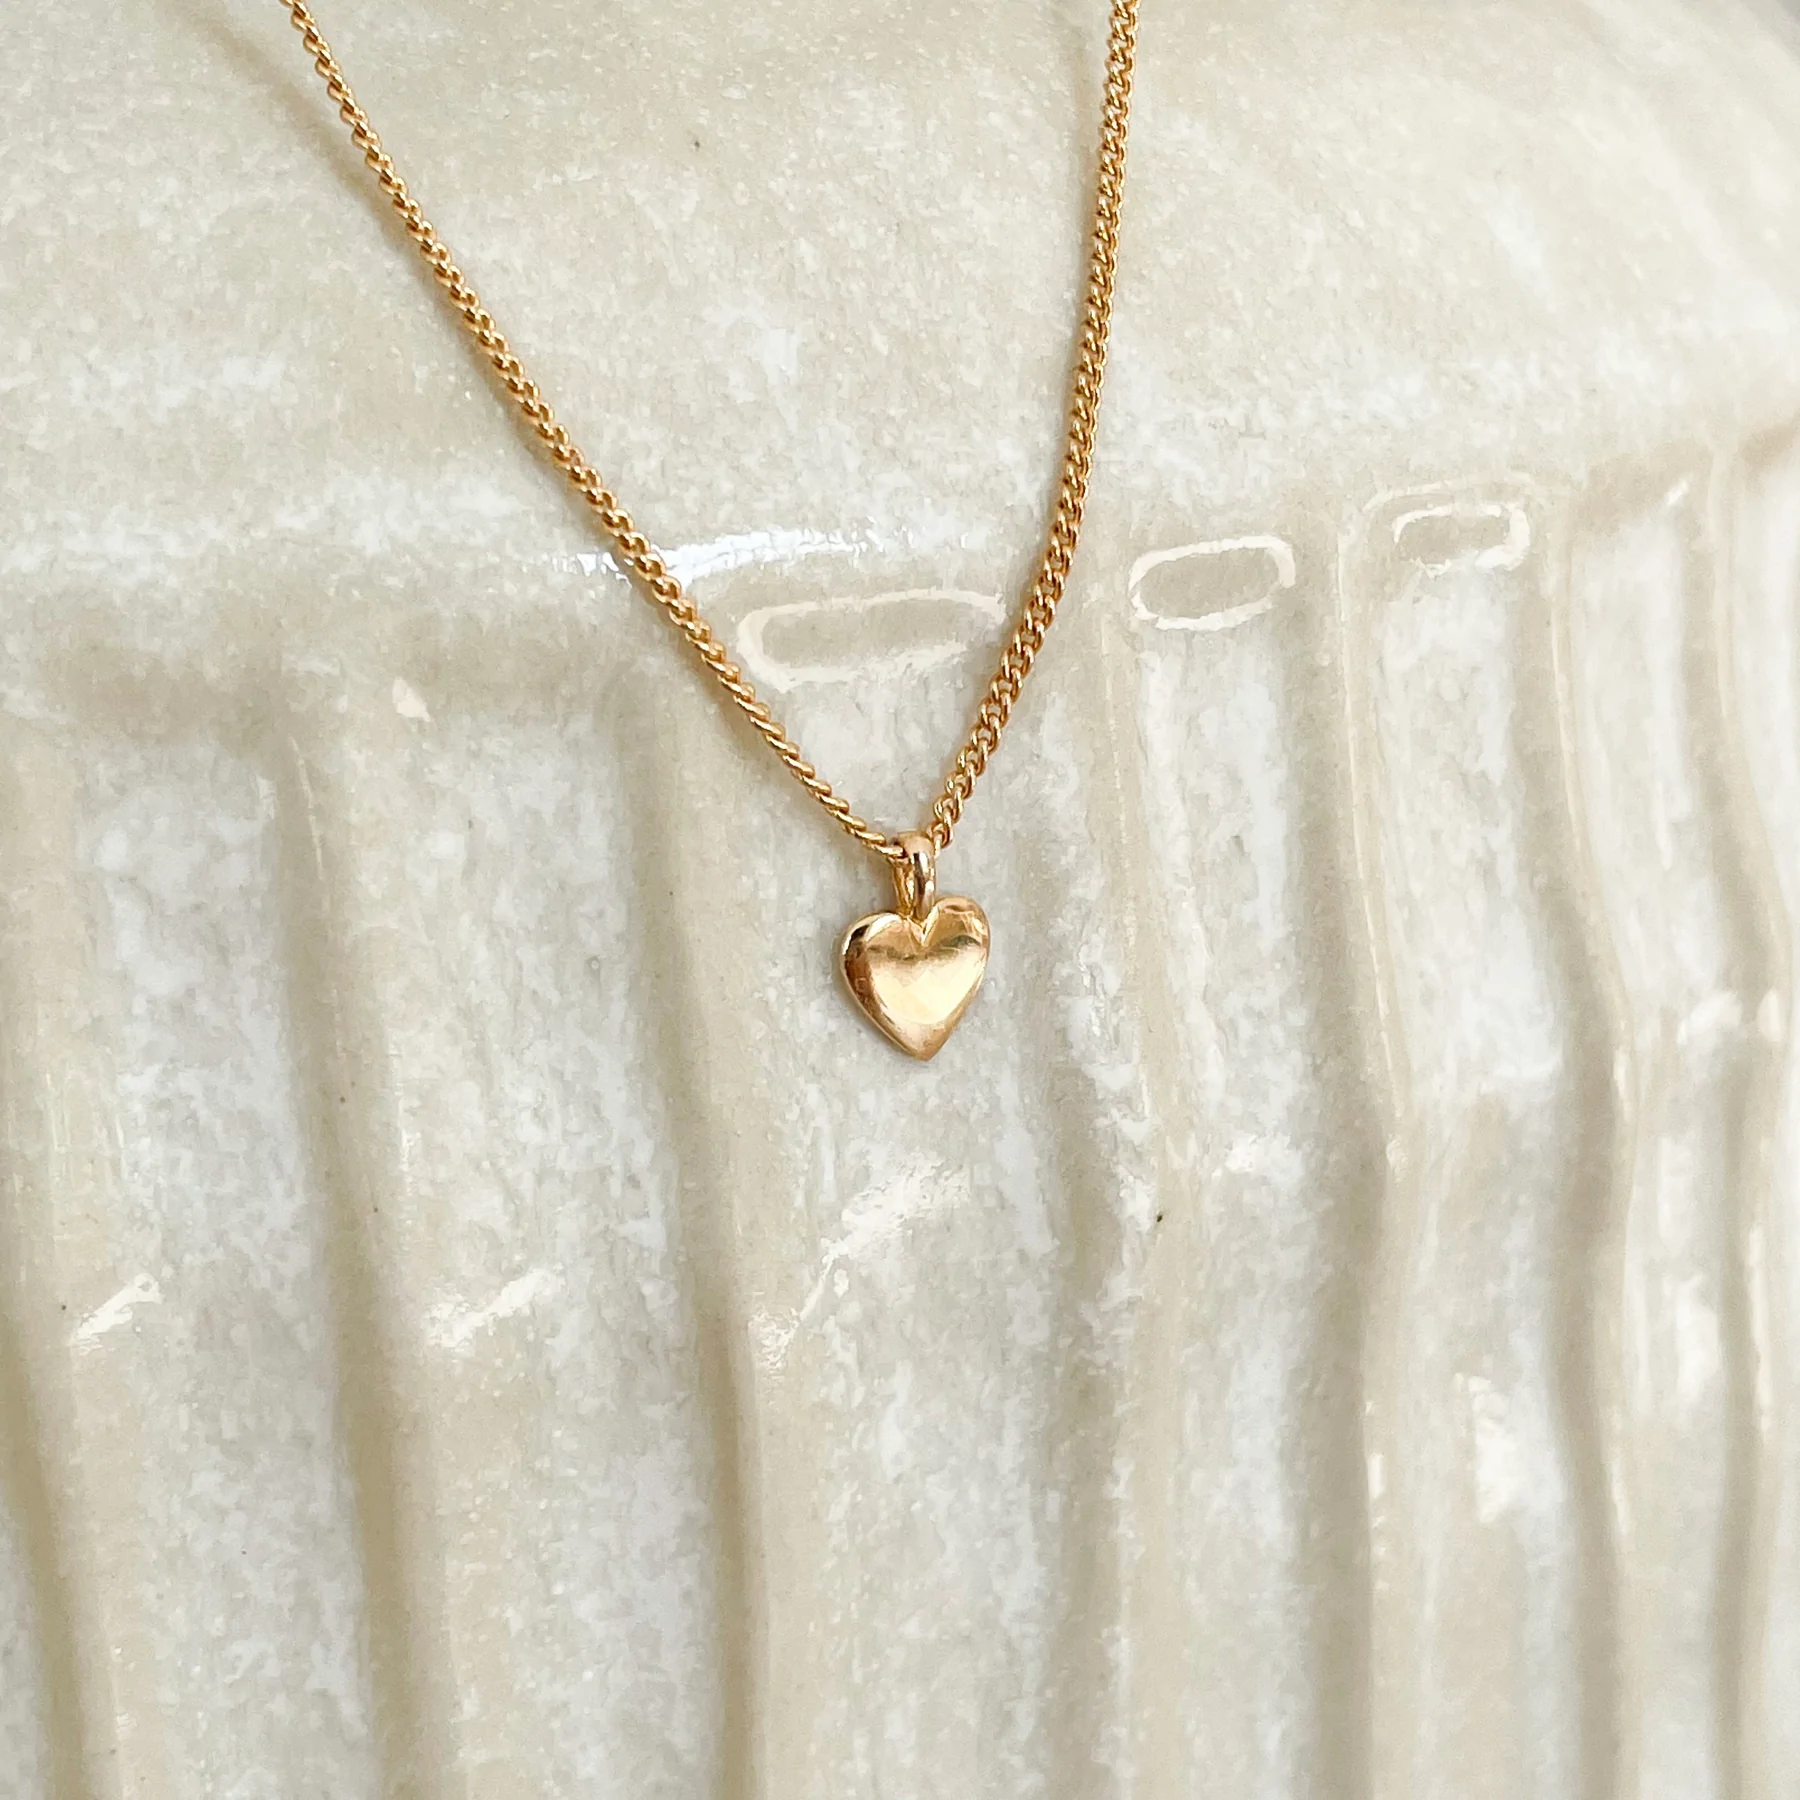 24Kae Gold Necklace with Small Heart